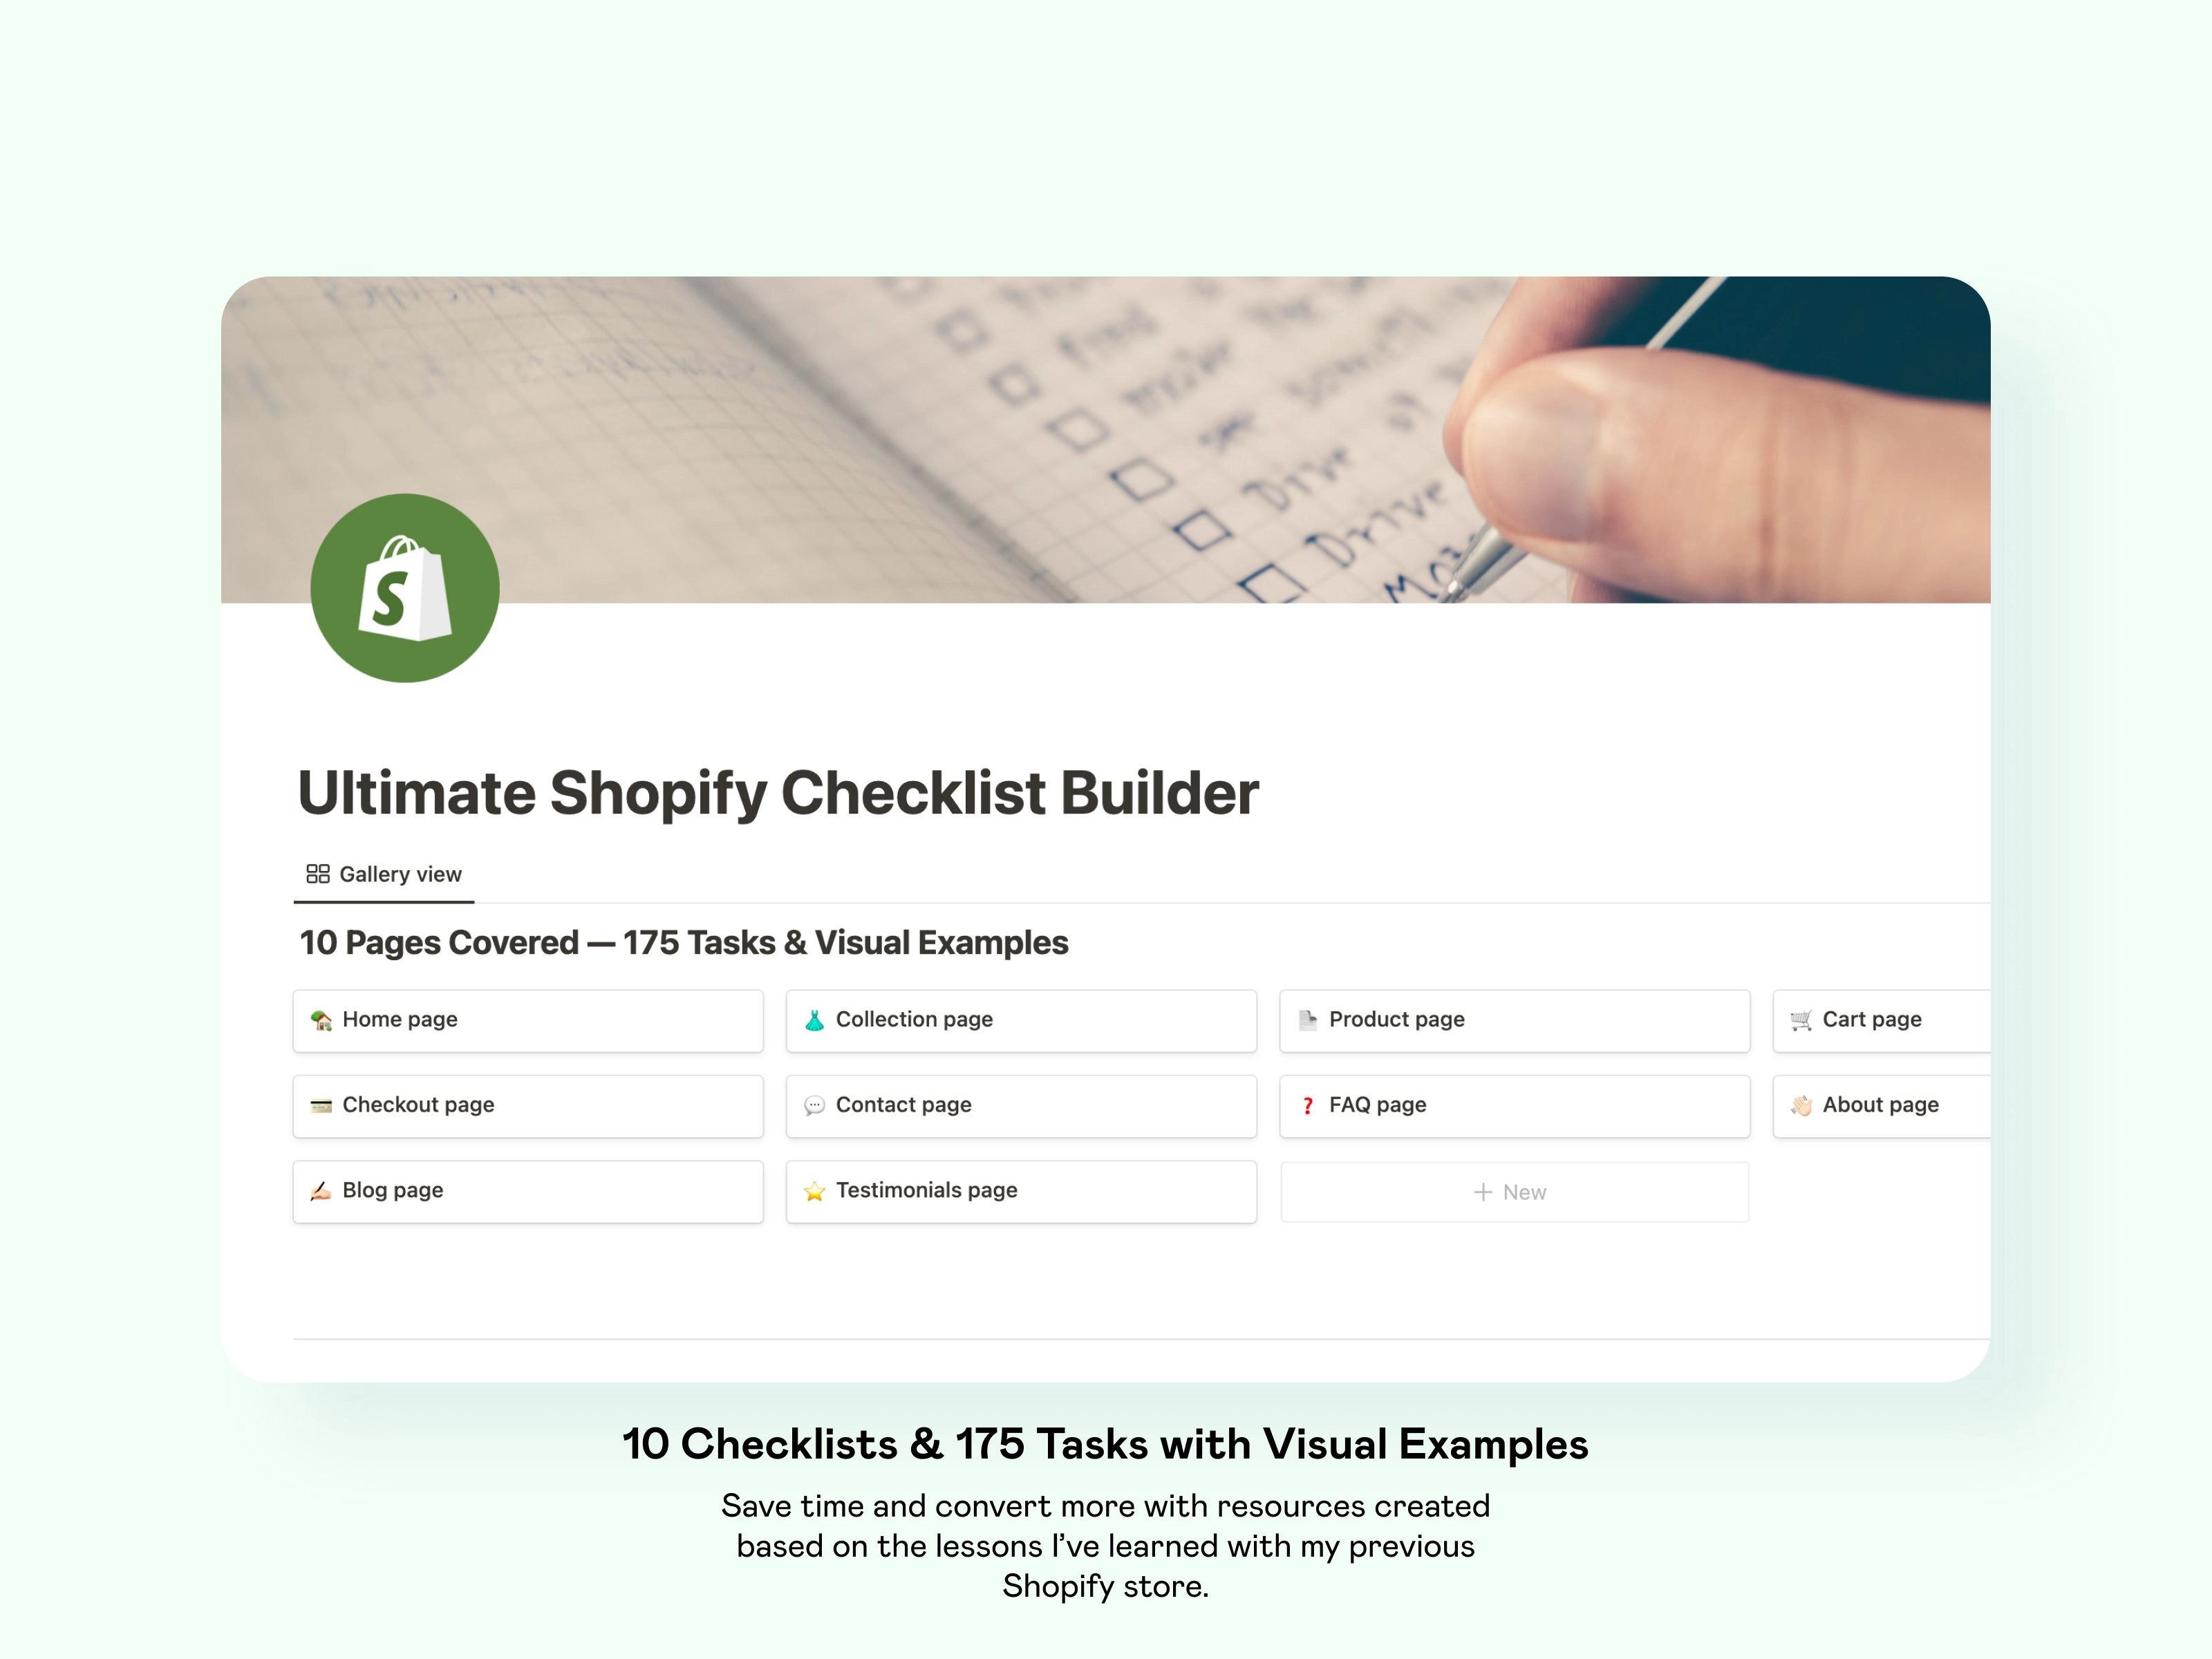 Ultimate Shopify Checklist & Selling Guide